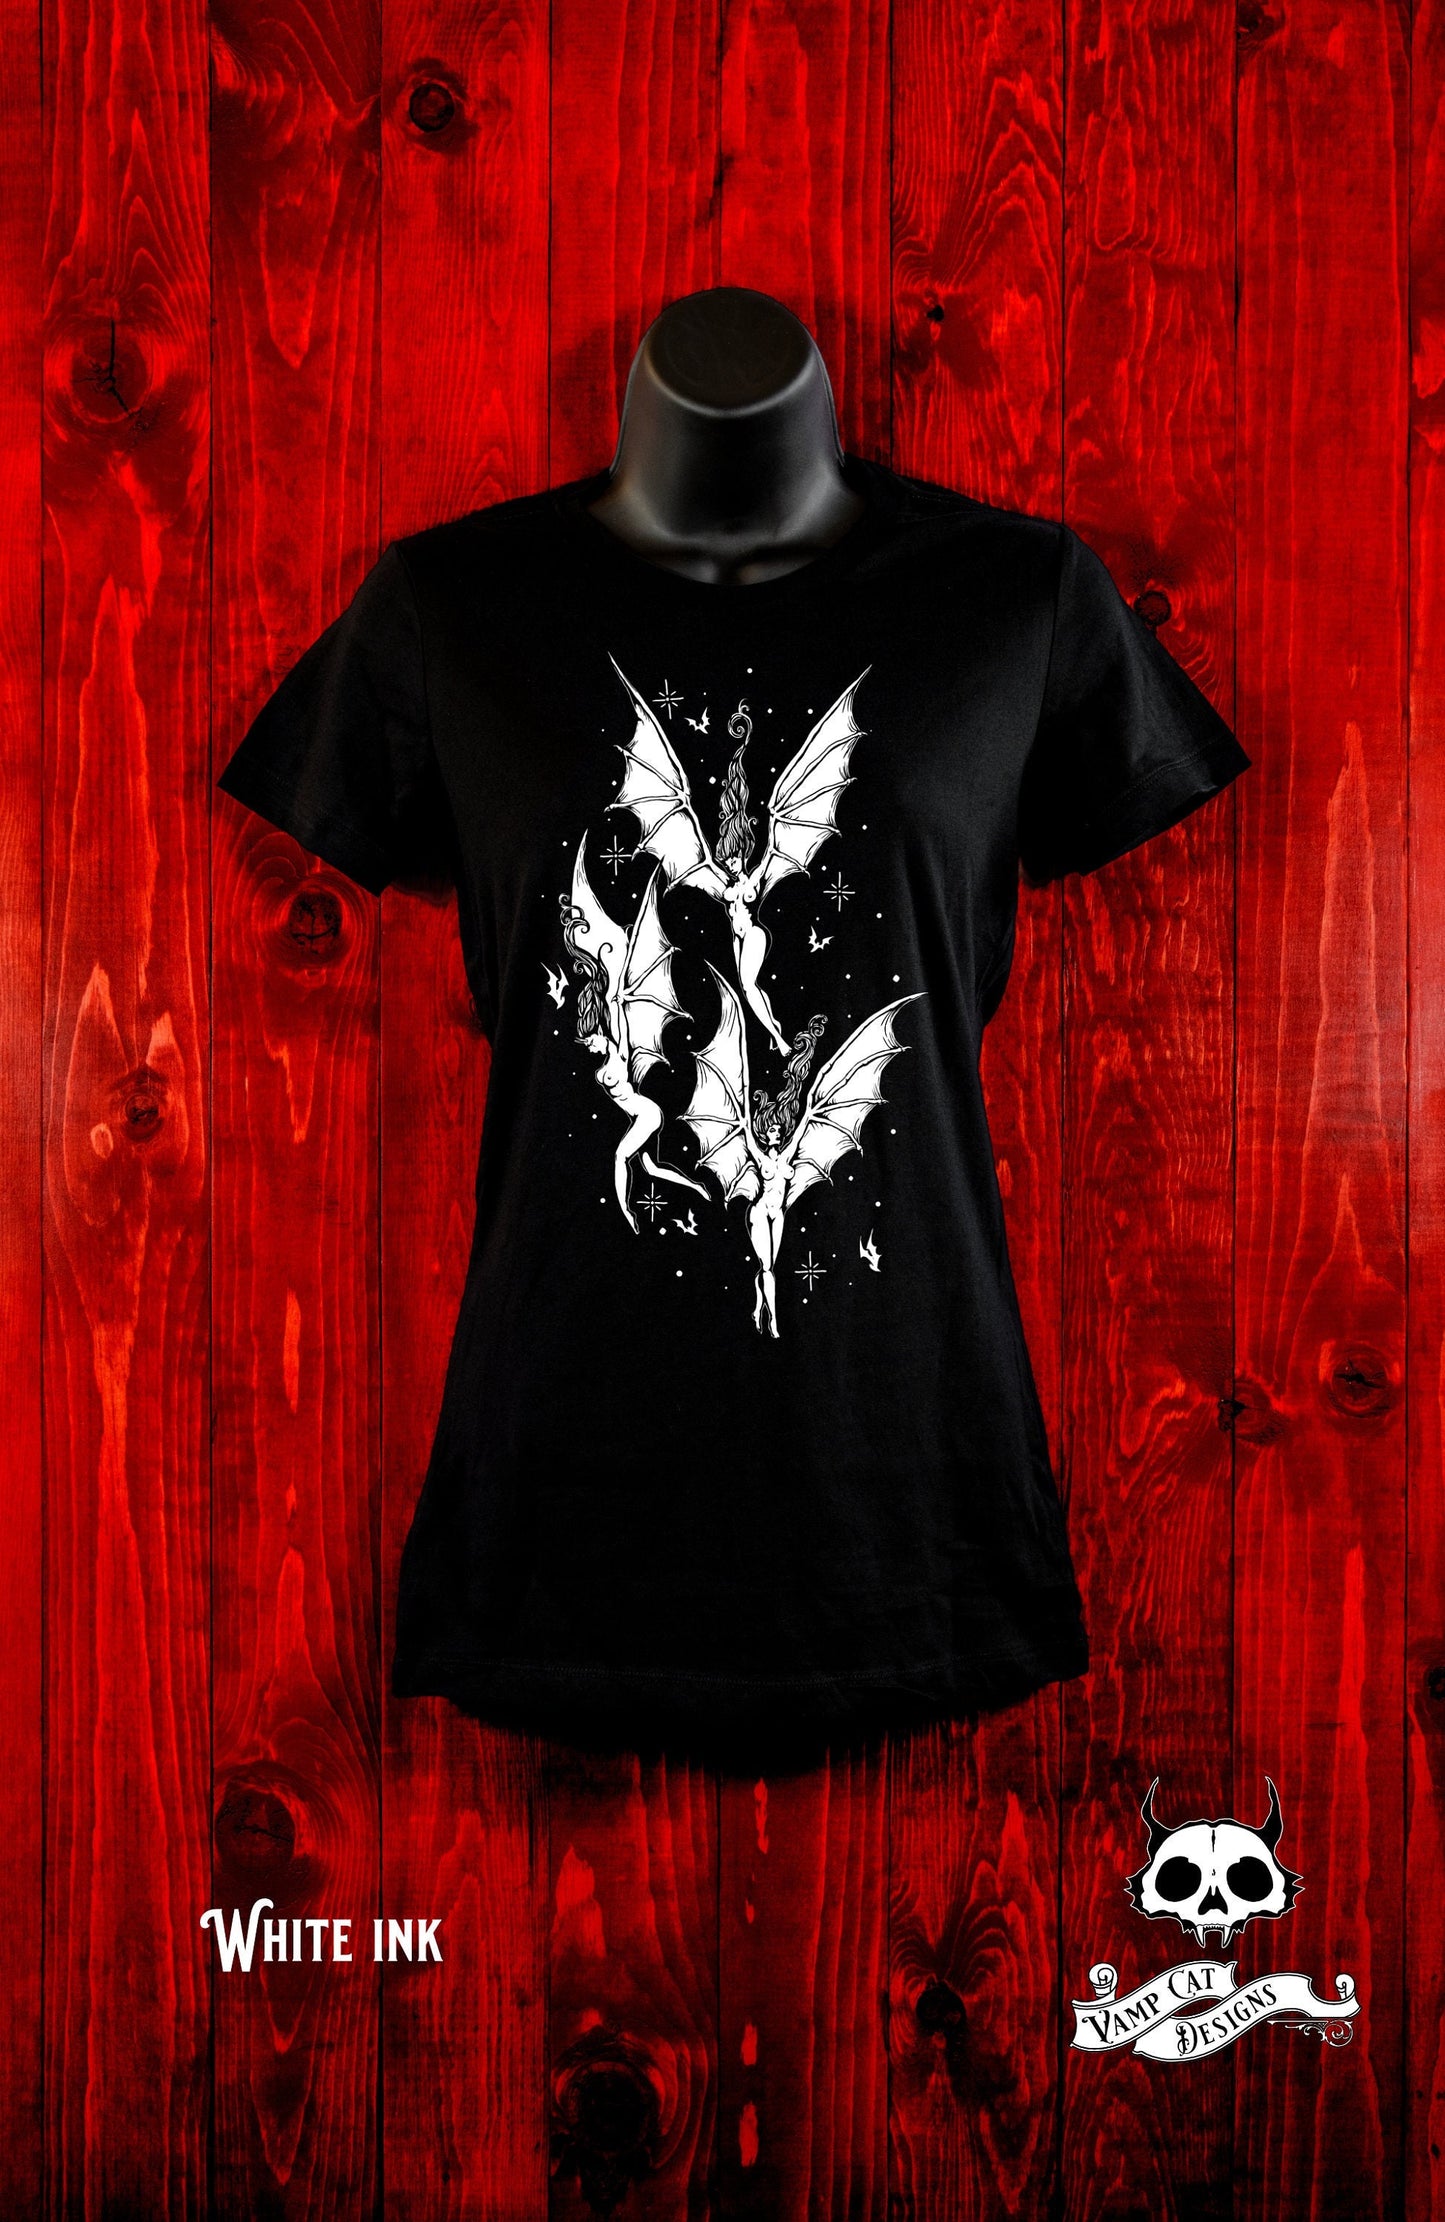 Flight Of The Succubus-Women's Tee-Folklore Art-Dark Apparel-Witchy Tee-Women's Top-Gothic Tee-Female Demons-Succubus Art Tee